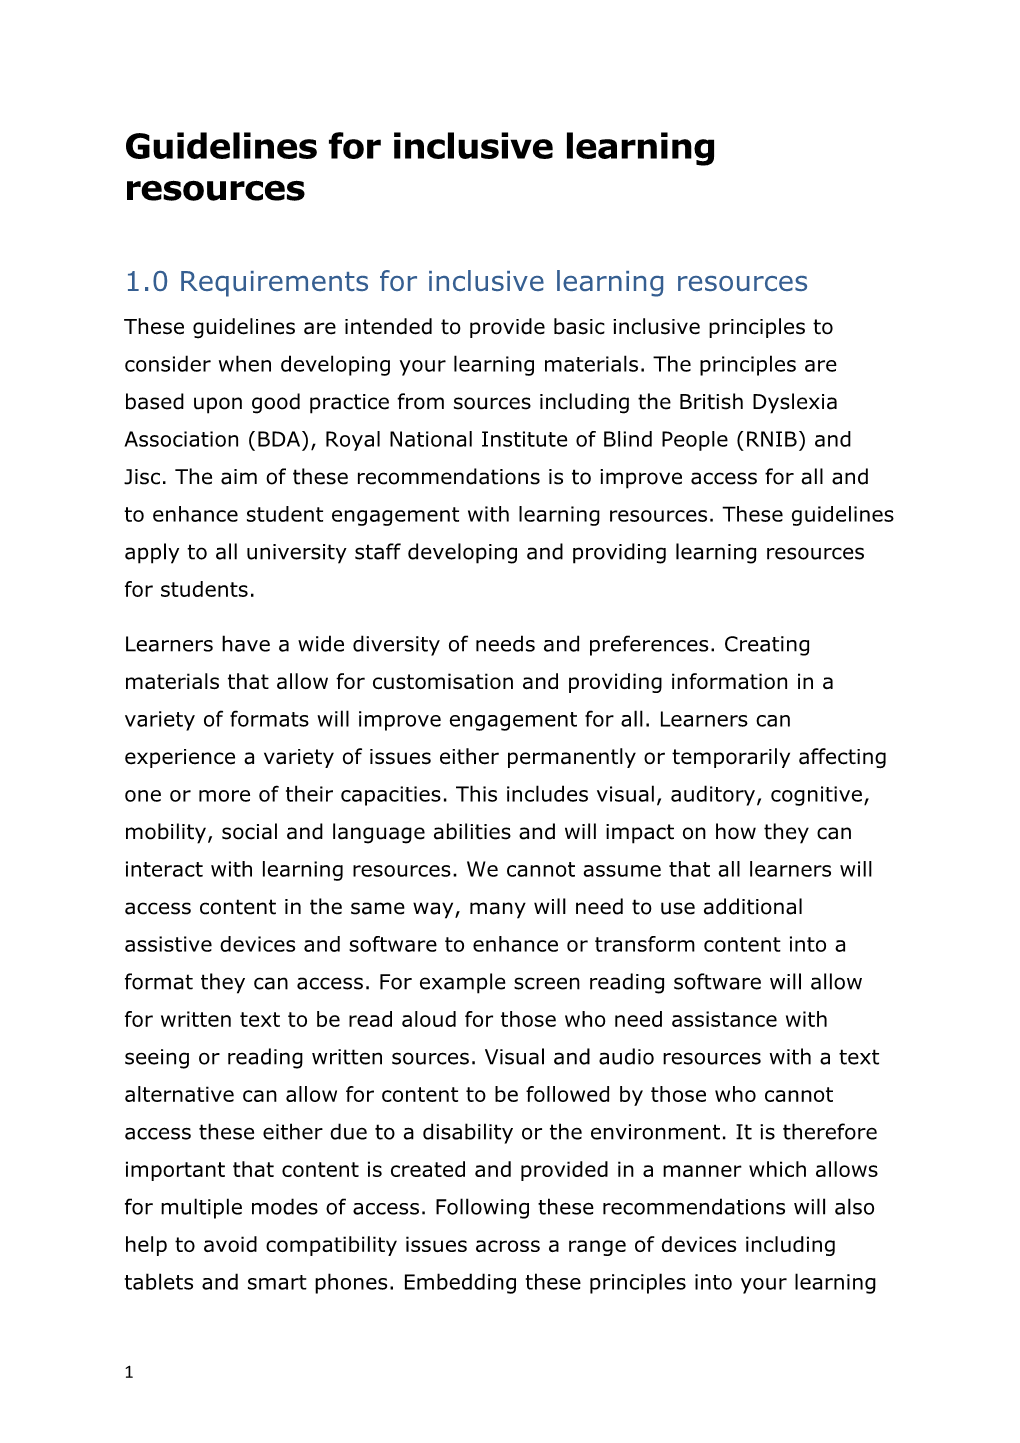 1.0 Requirements for Inclusive Learning Resources